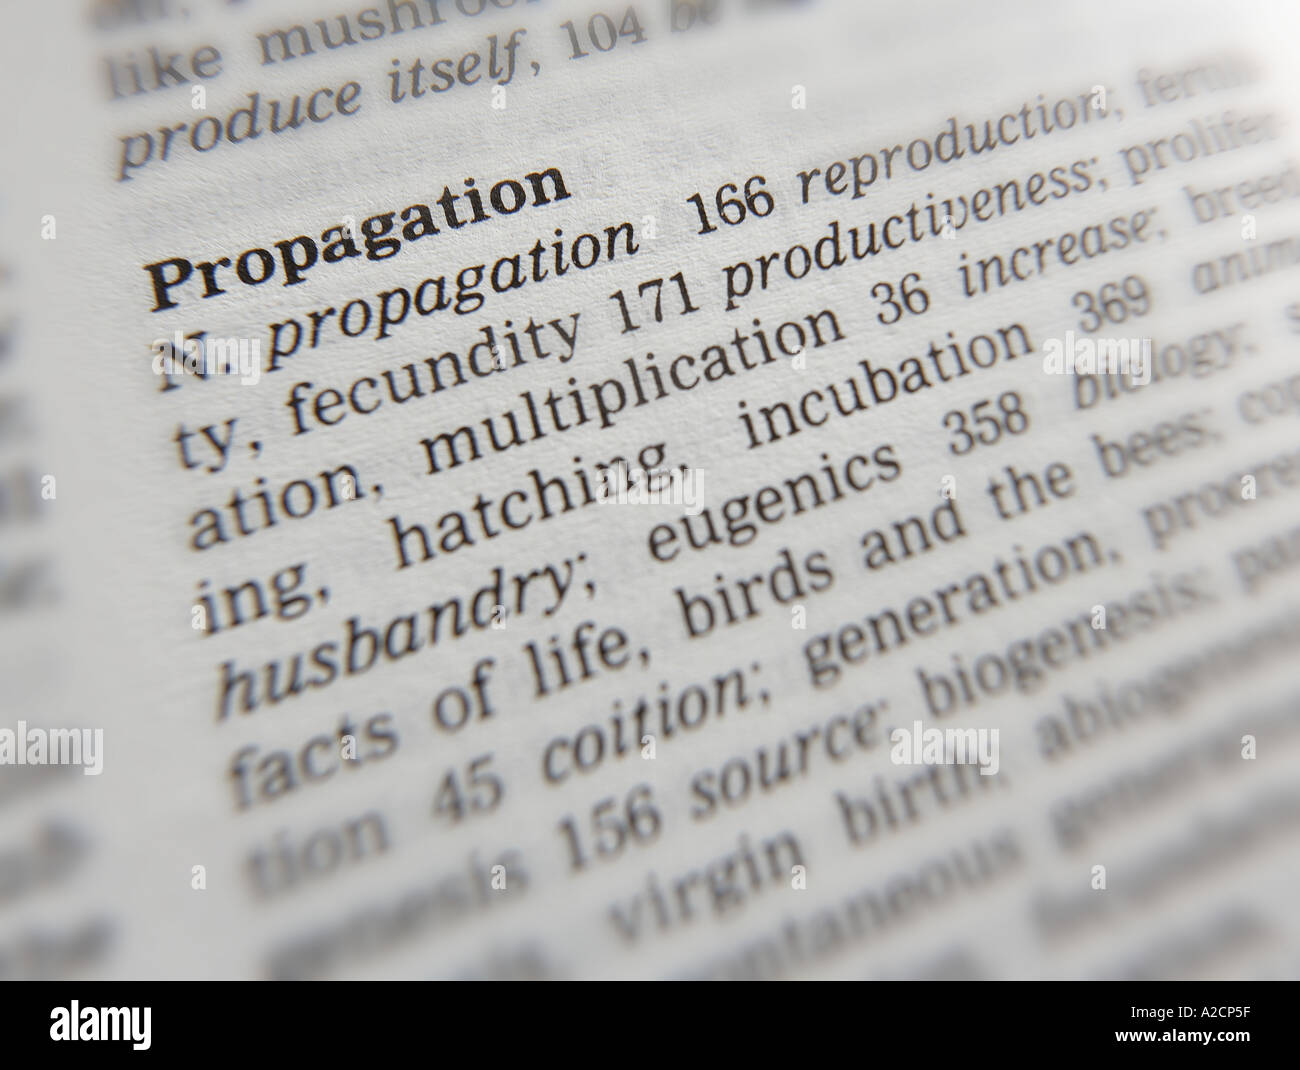 THESAURUS PAGE SHOWING DEFINITION OF WORD PROPAGATION Stock Photo